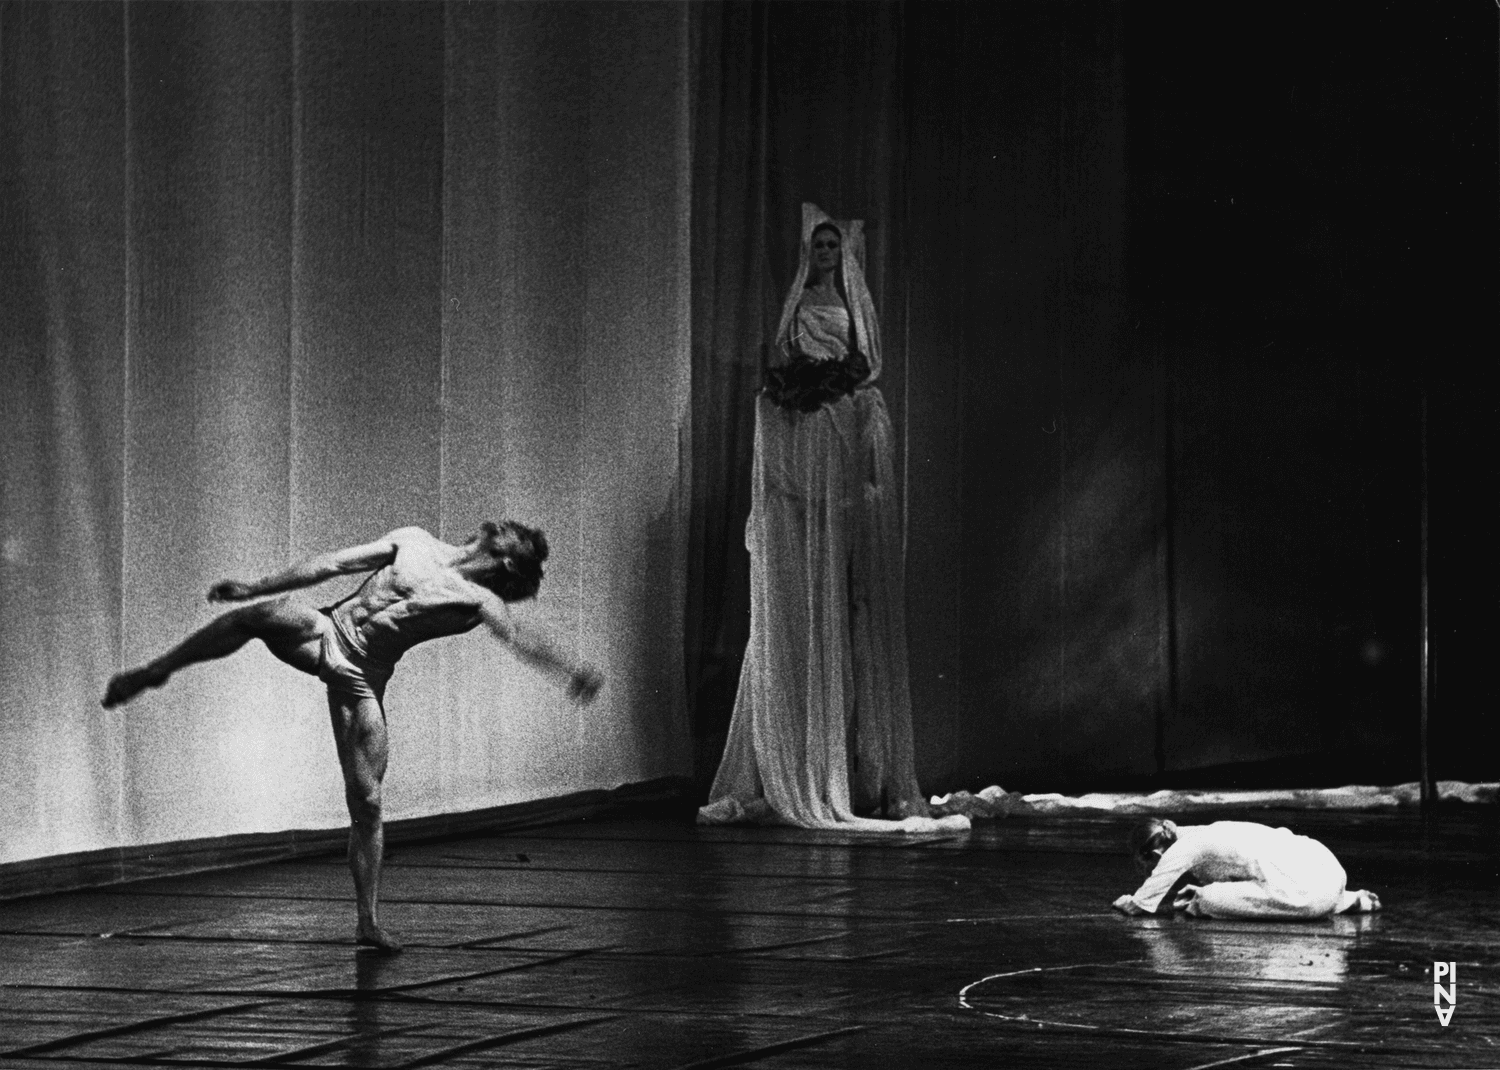 Dominique Mercy, Tjitske Broersma and Malou Airaudo in “Orpheus und Eurydike” by Pina Bausch